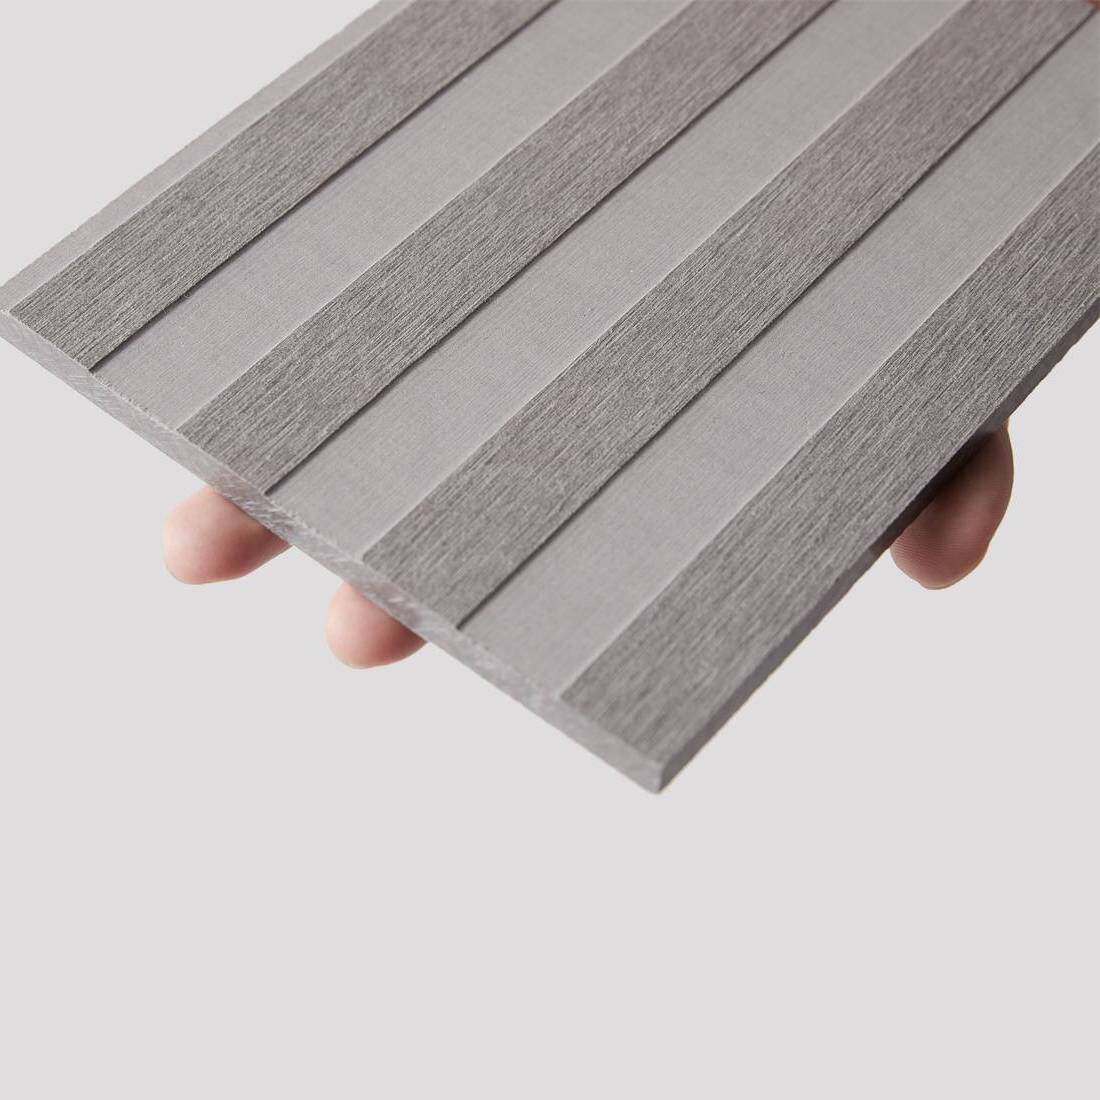 Grooved Fiber Cement Board For Personalized Sophistication